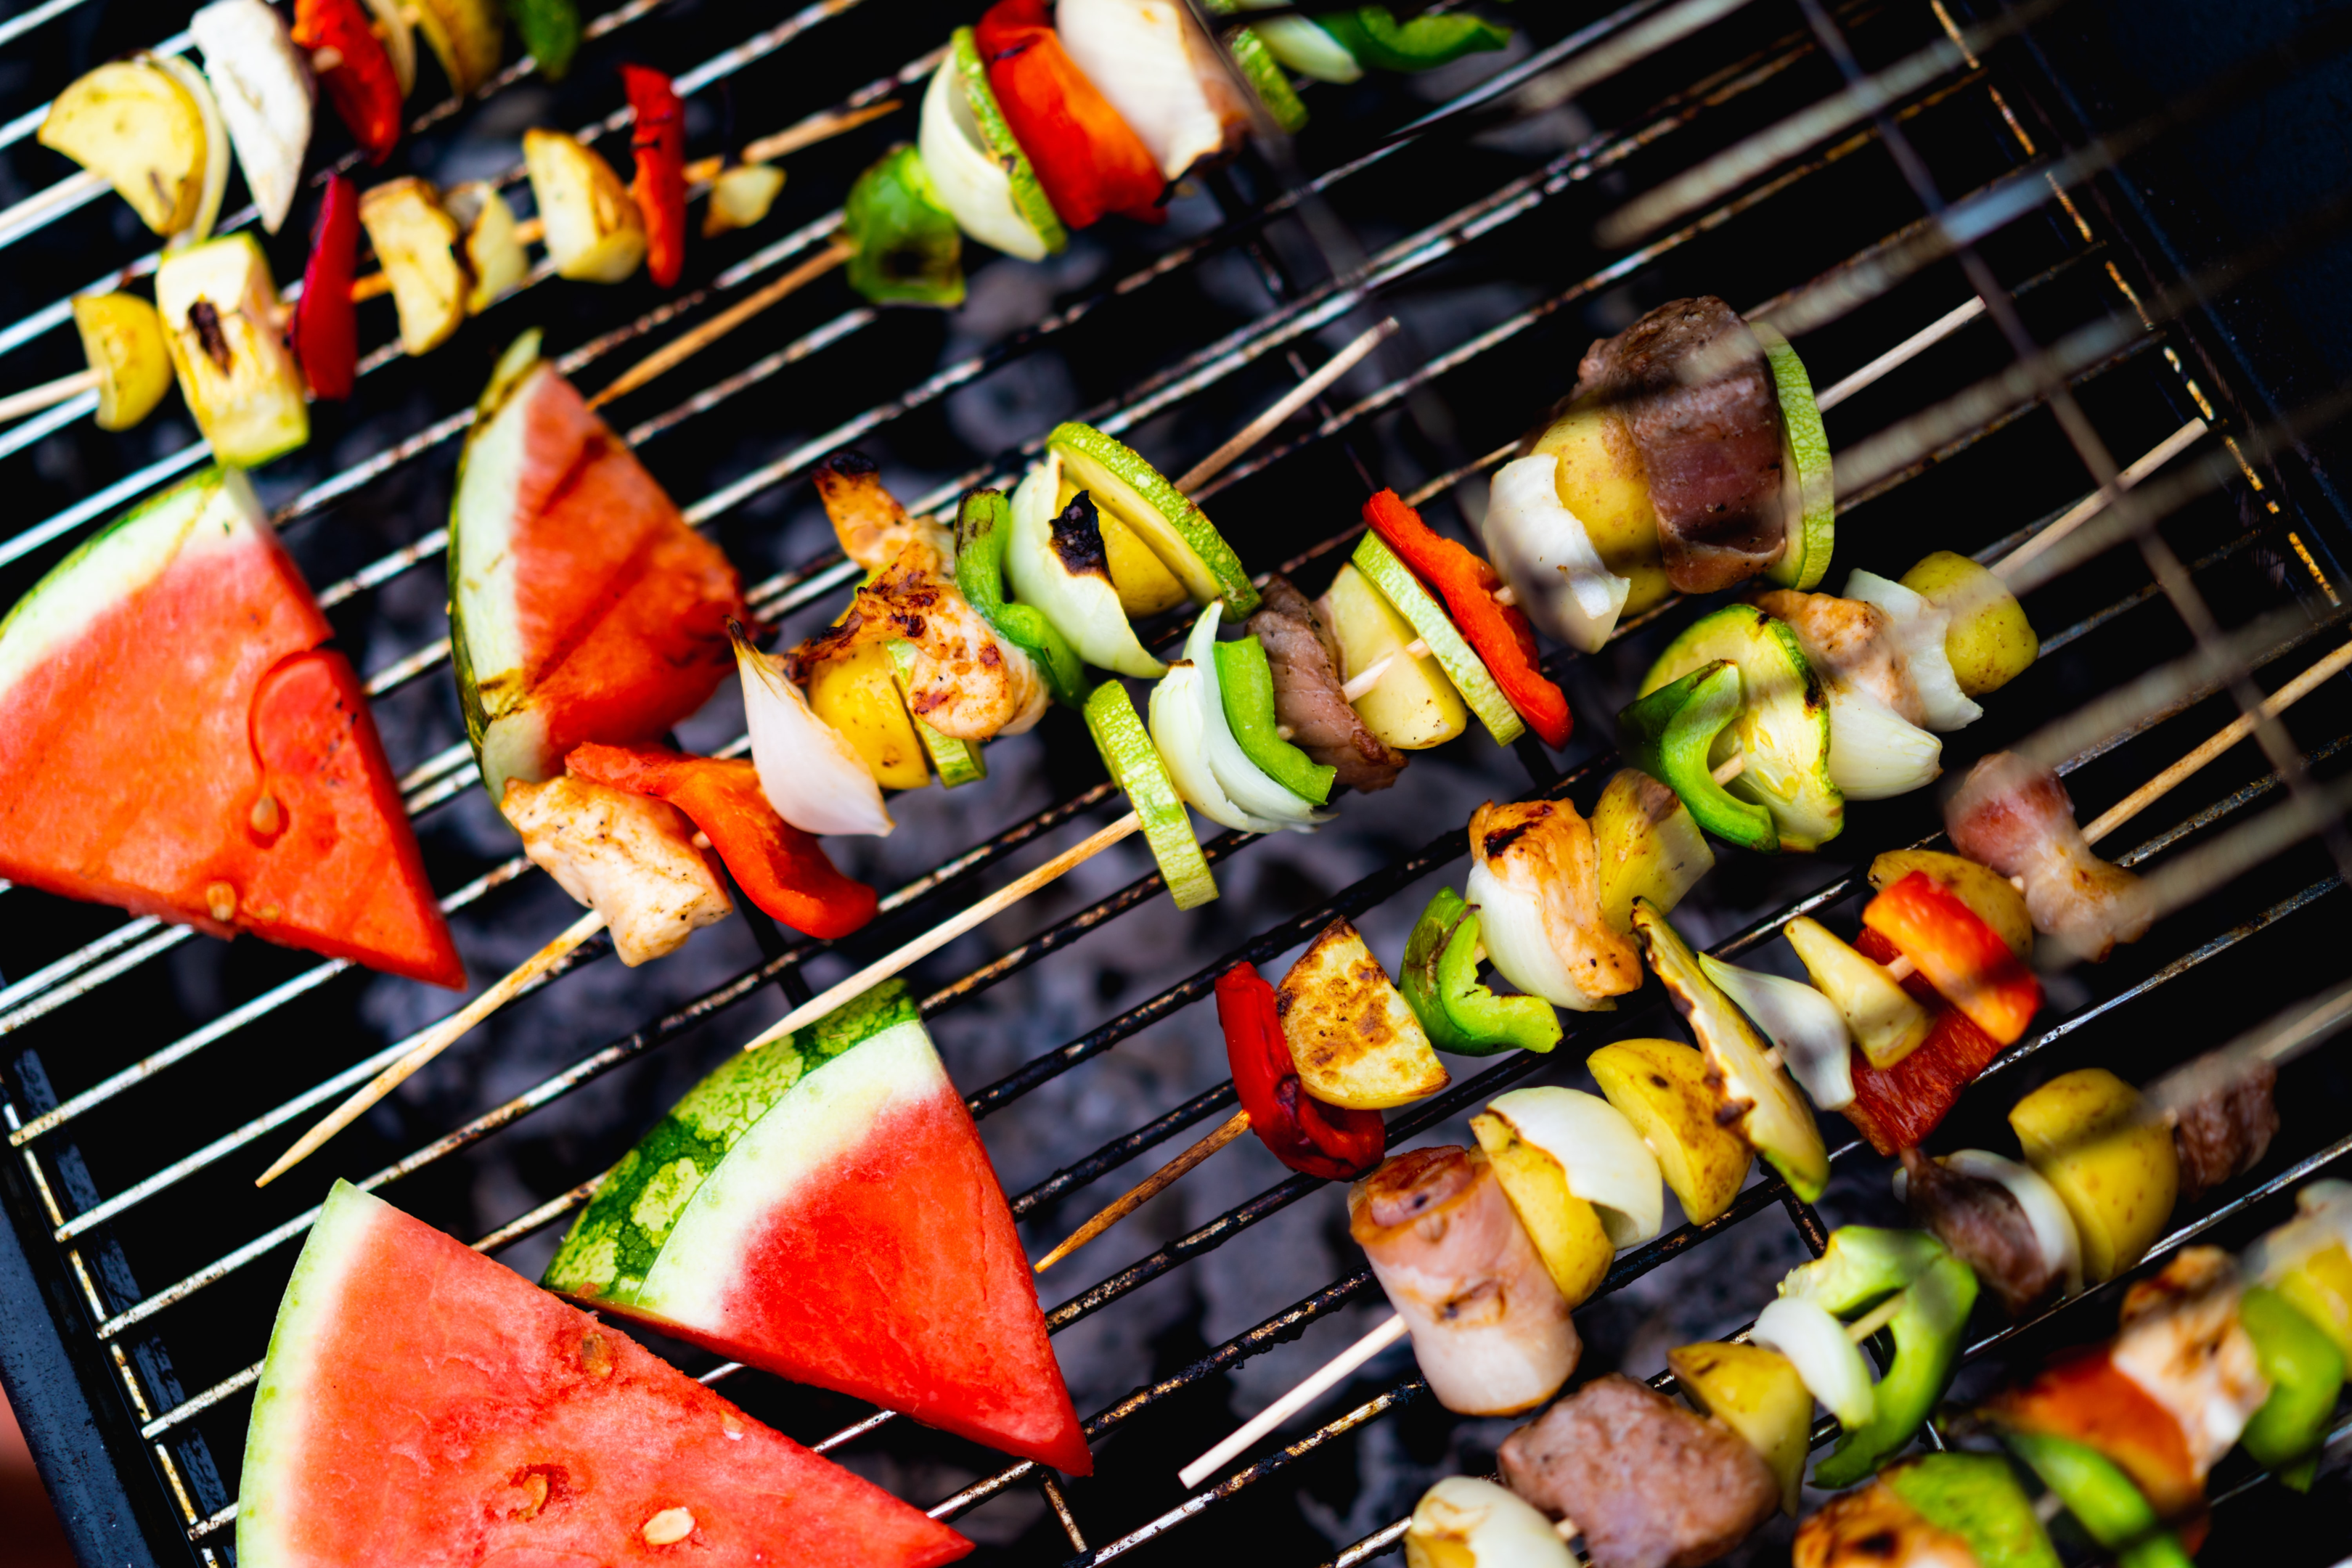 Grilled fruits work as well as grilled meats